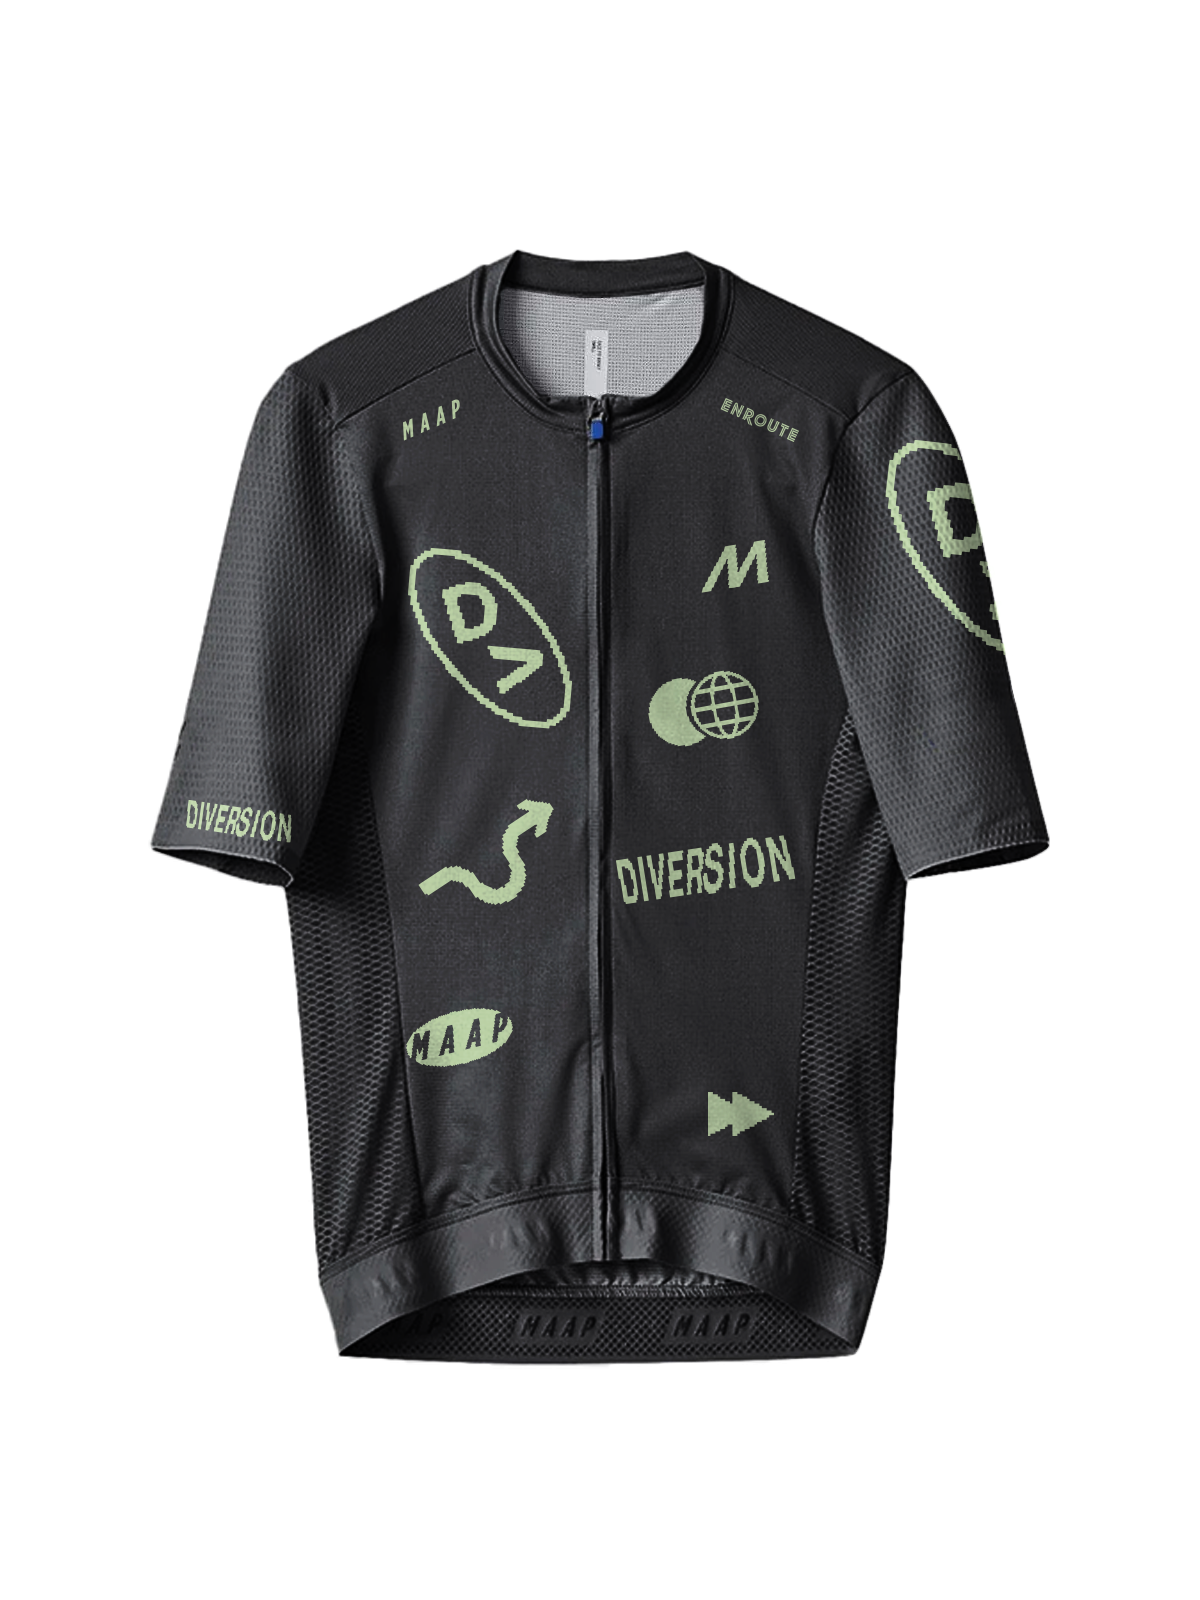 MAAP Diversion Pro Air Jersey - Charcoal